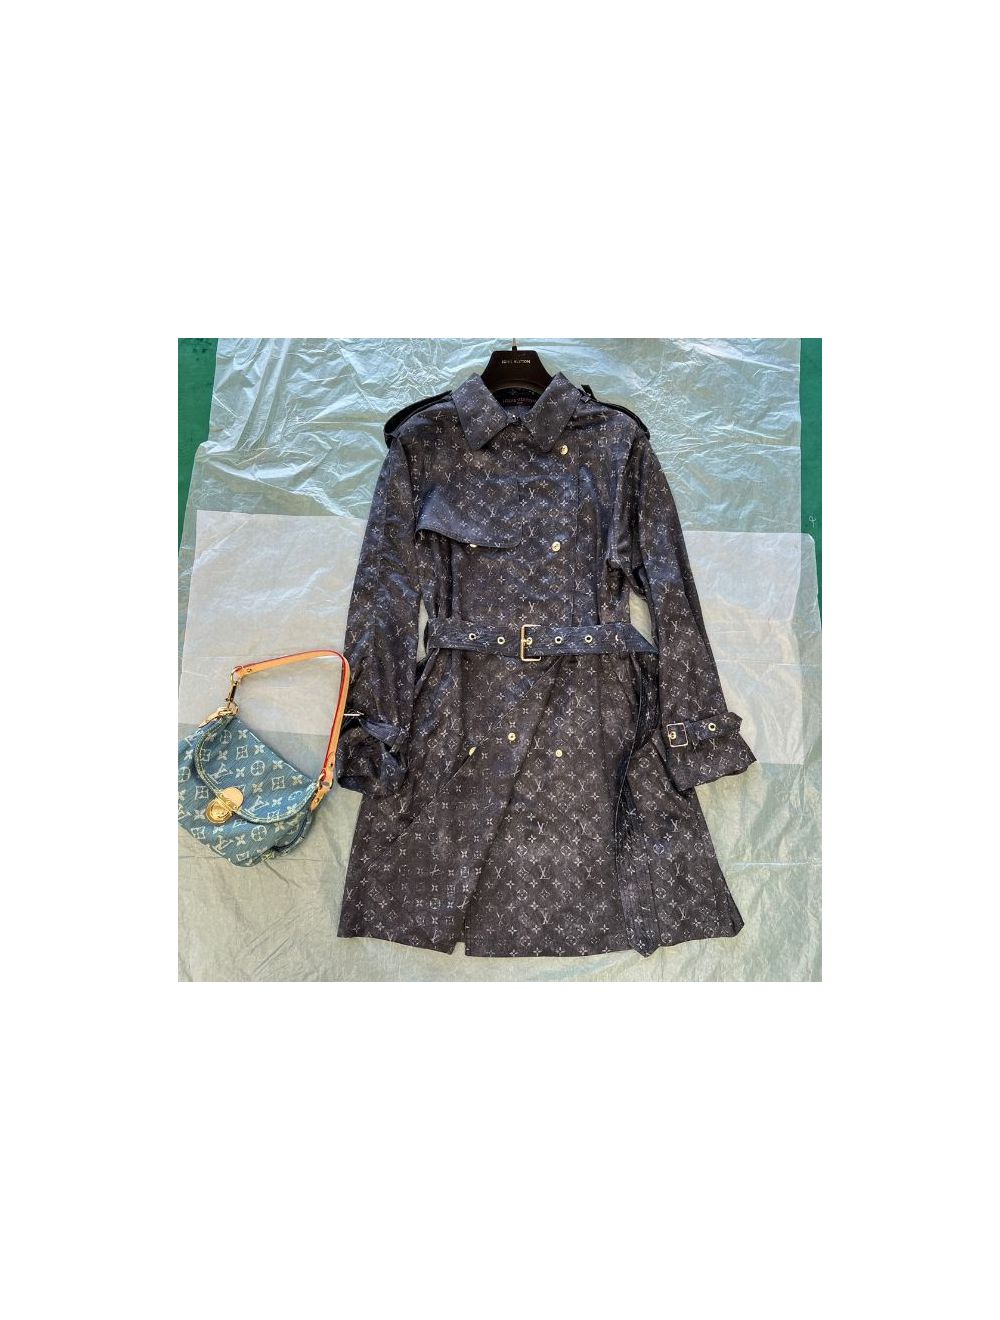 Monogram Denim Trench Coat - OBSOLETES DO NOT TOUCH 1AAWEJ